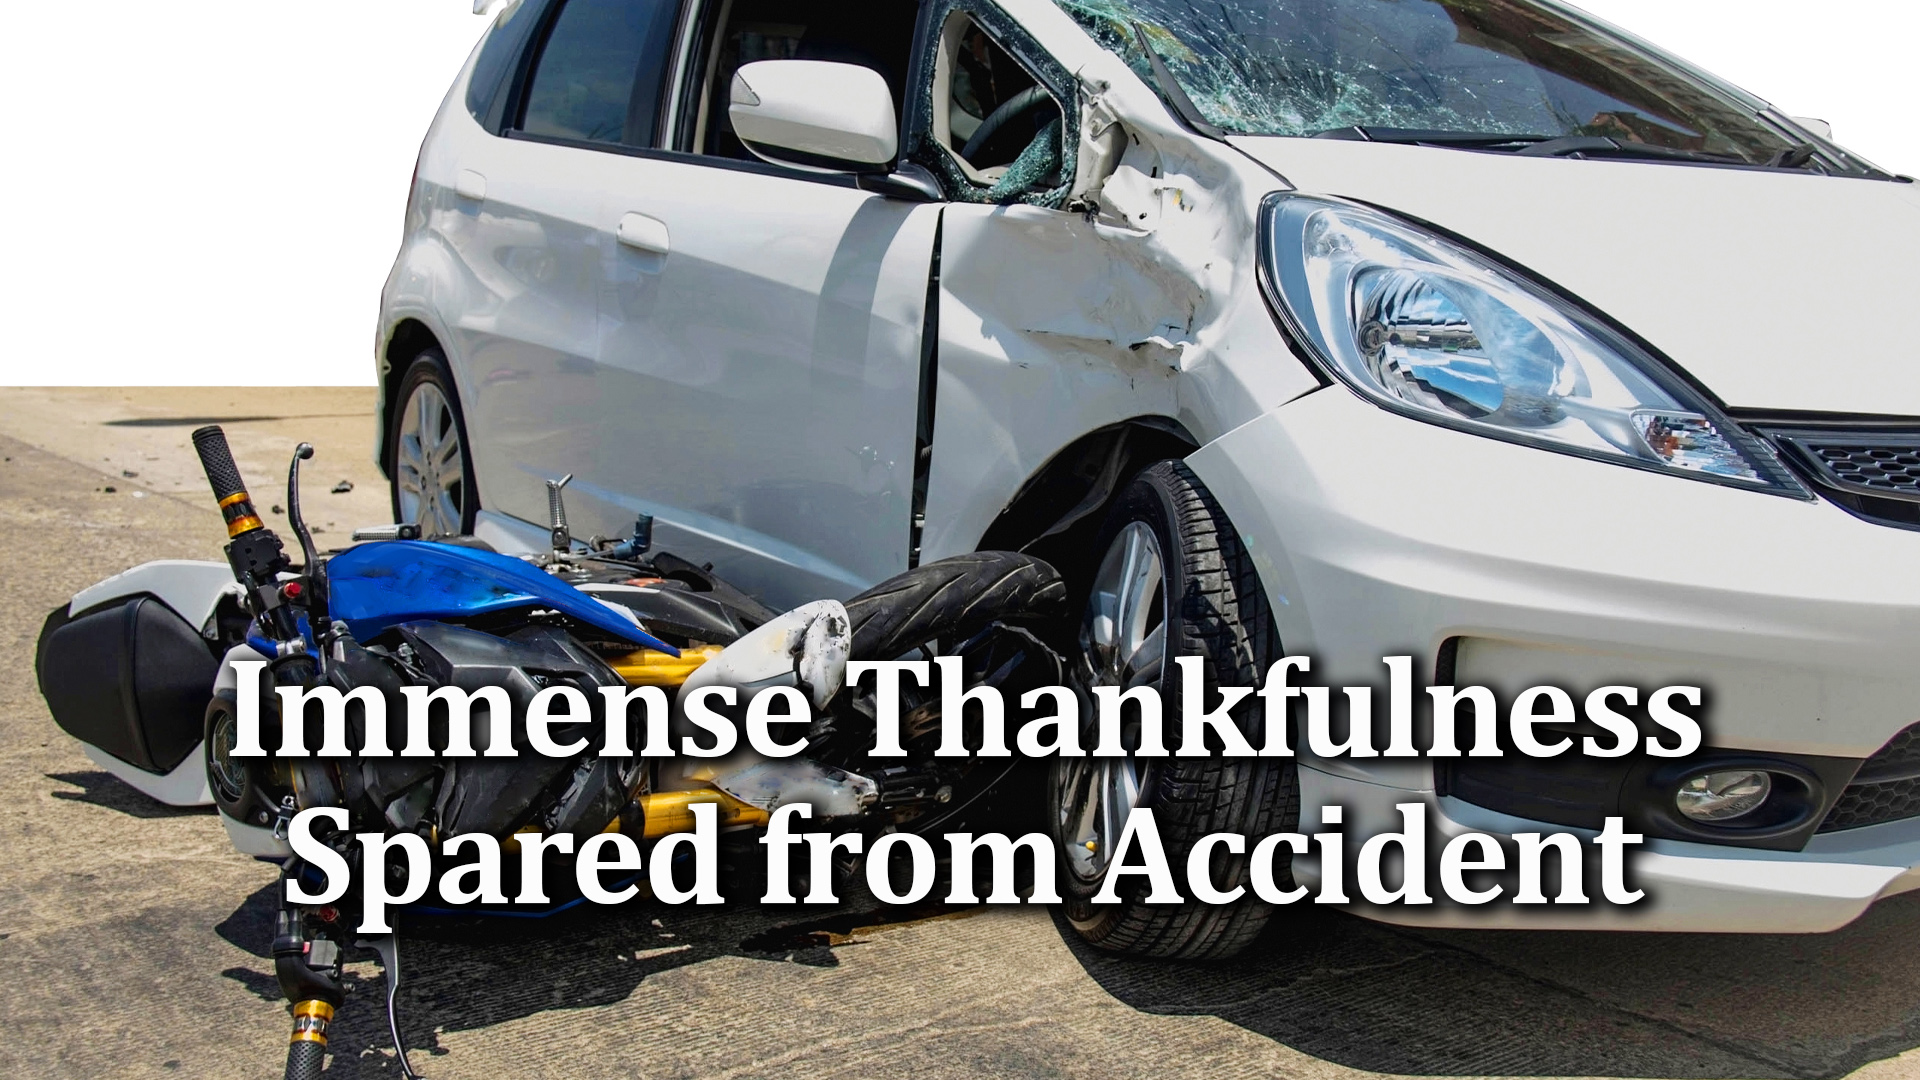 11-23-21 Immense Thankfulness Spared from Accident